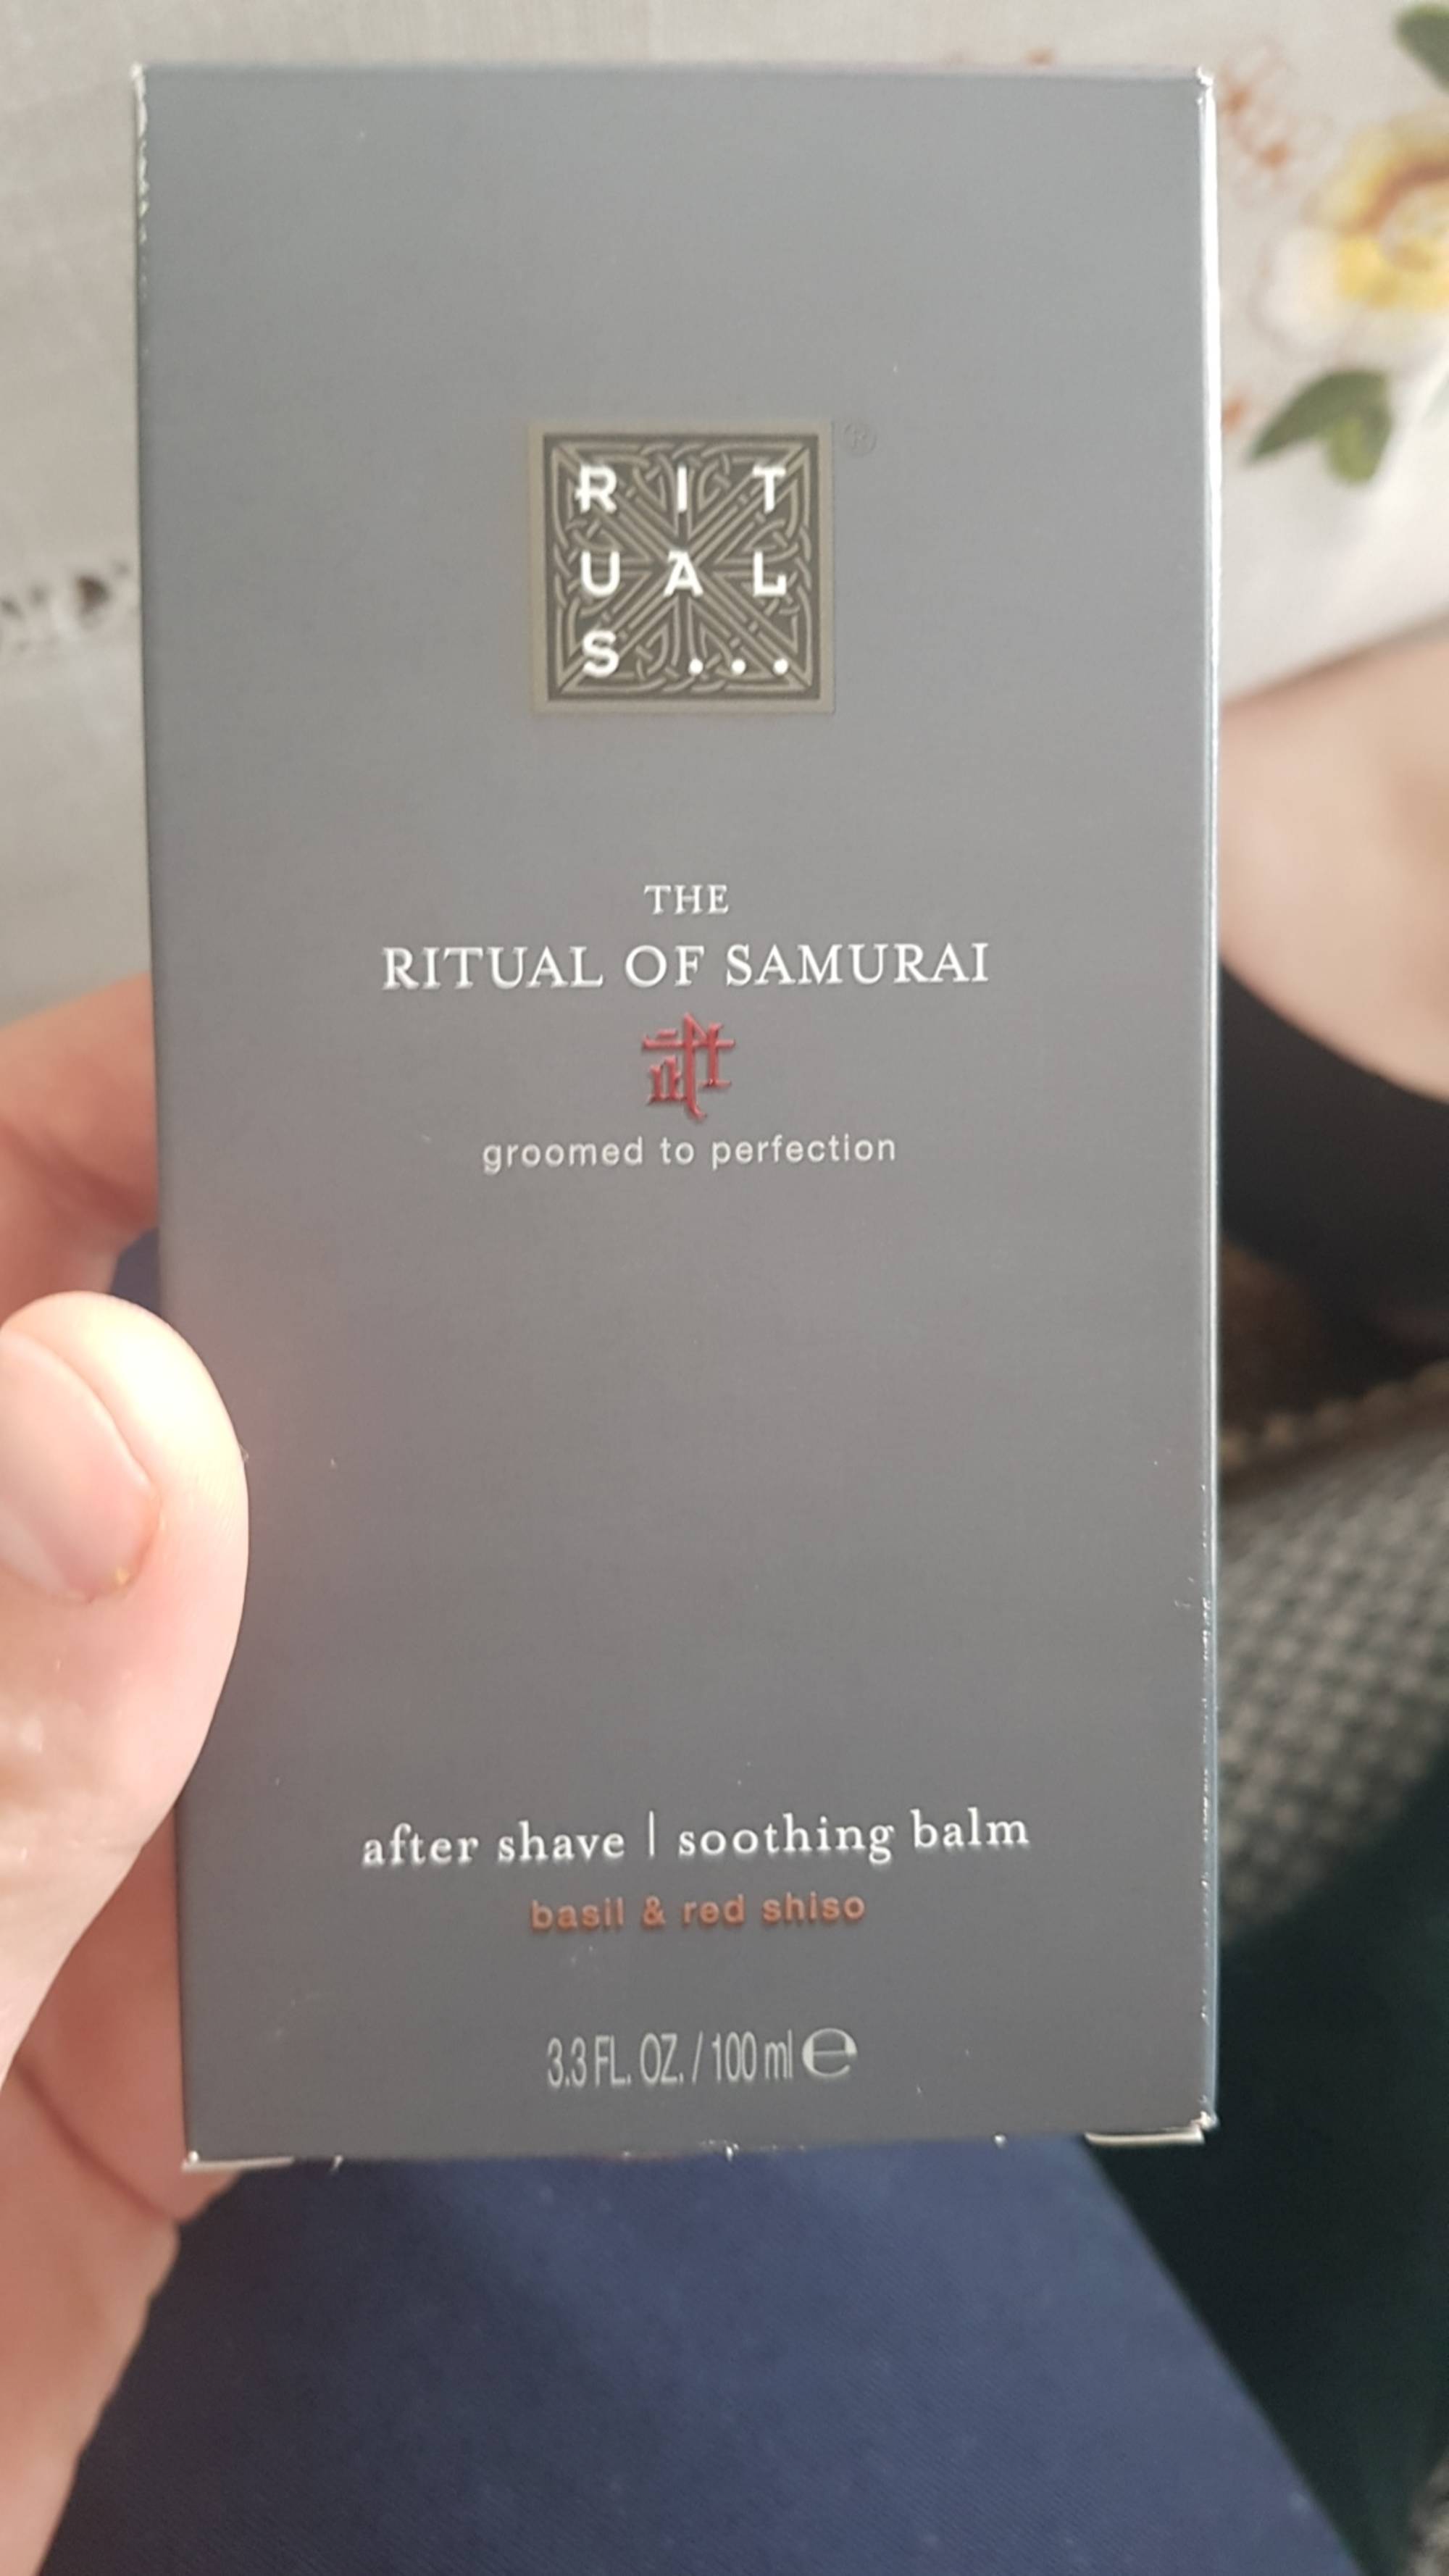 Composition RITUALS The Ritual of Samurai - After shave soothing balm -  UFC-Que Choisir